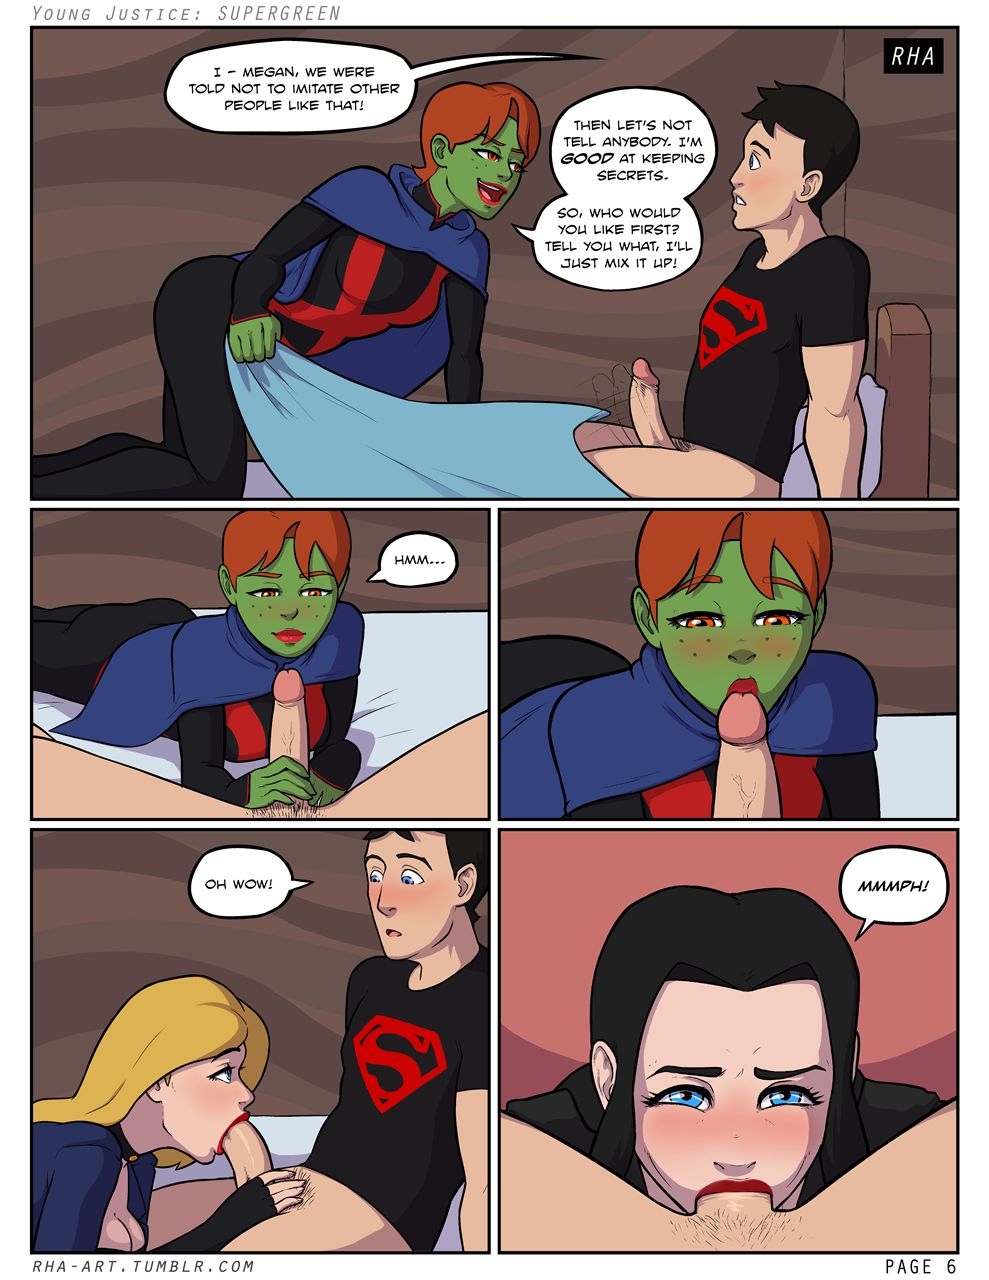 [Rha] Young Justice: Supergreen (Young Justice) 6